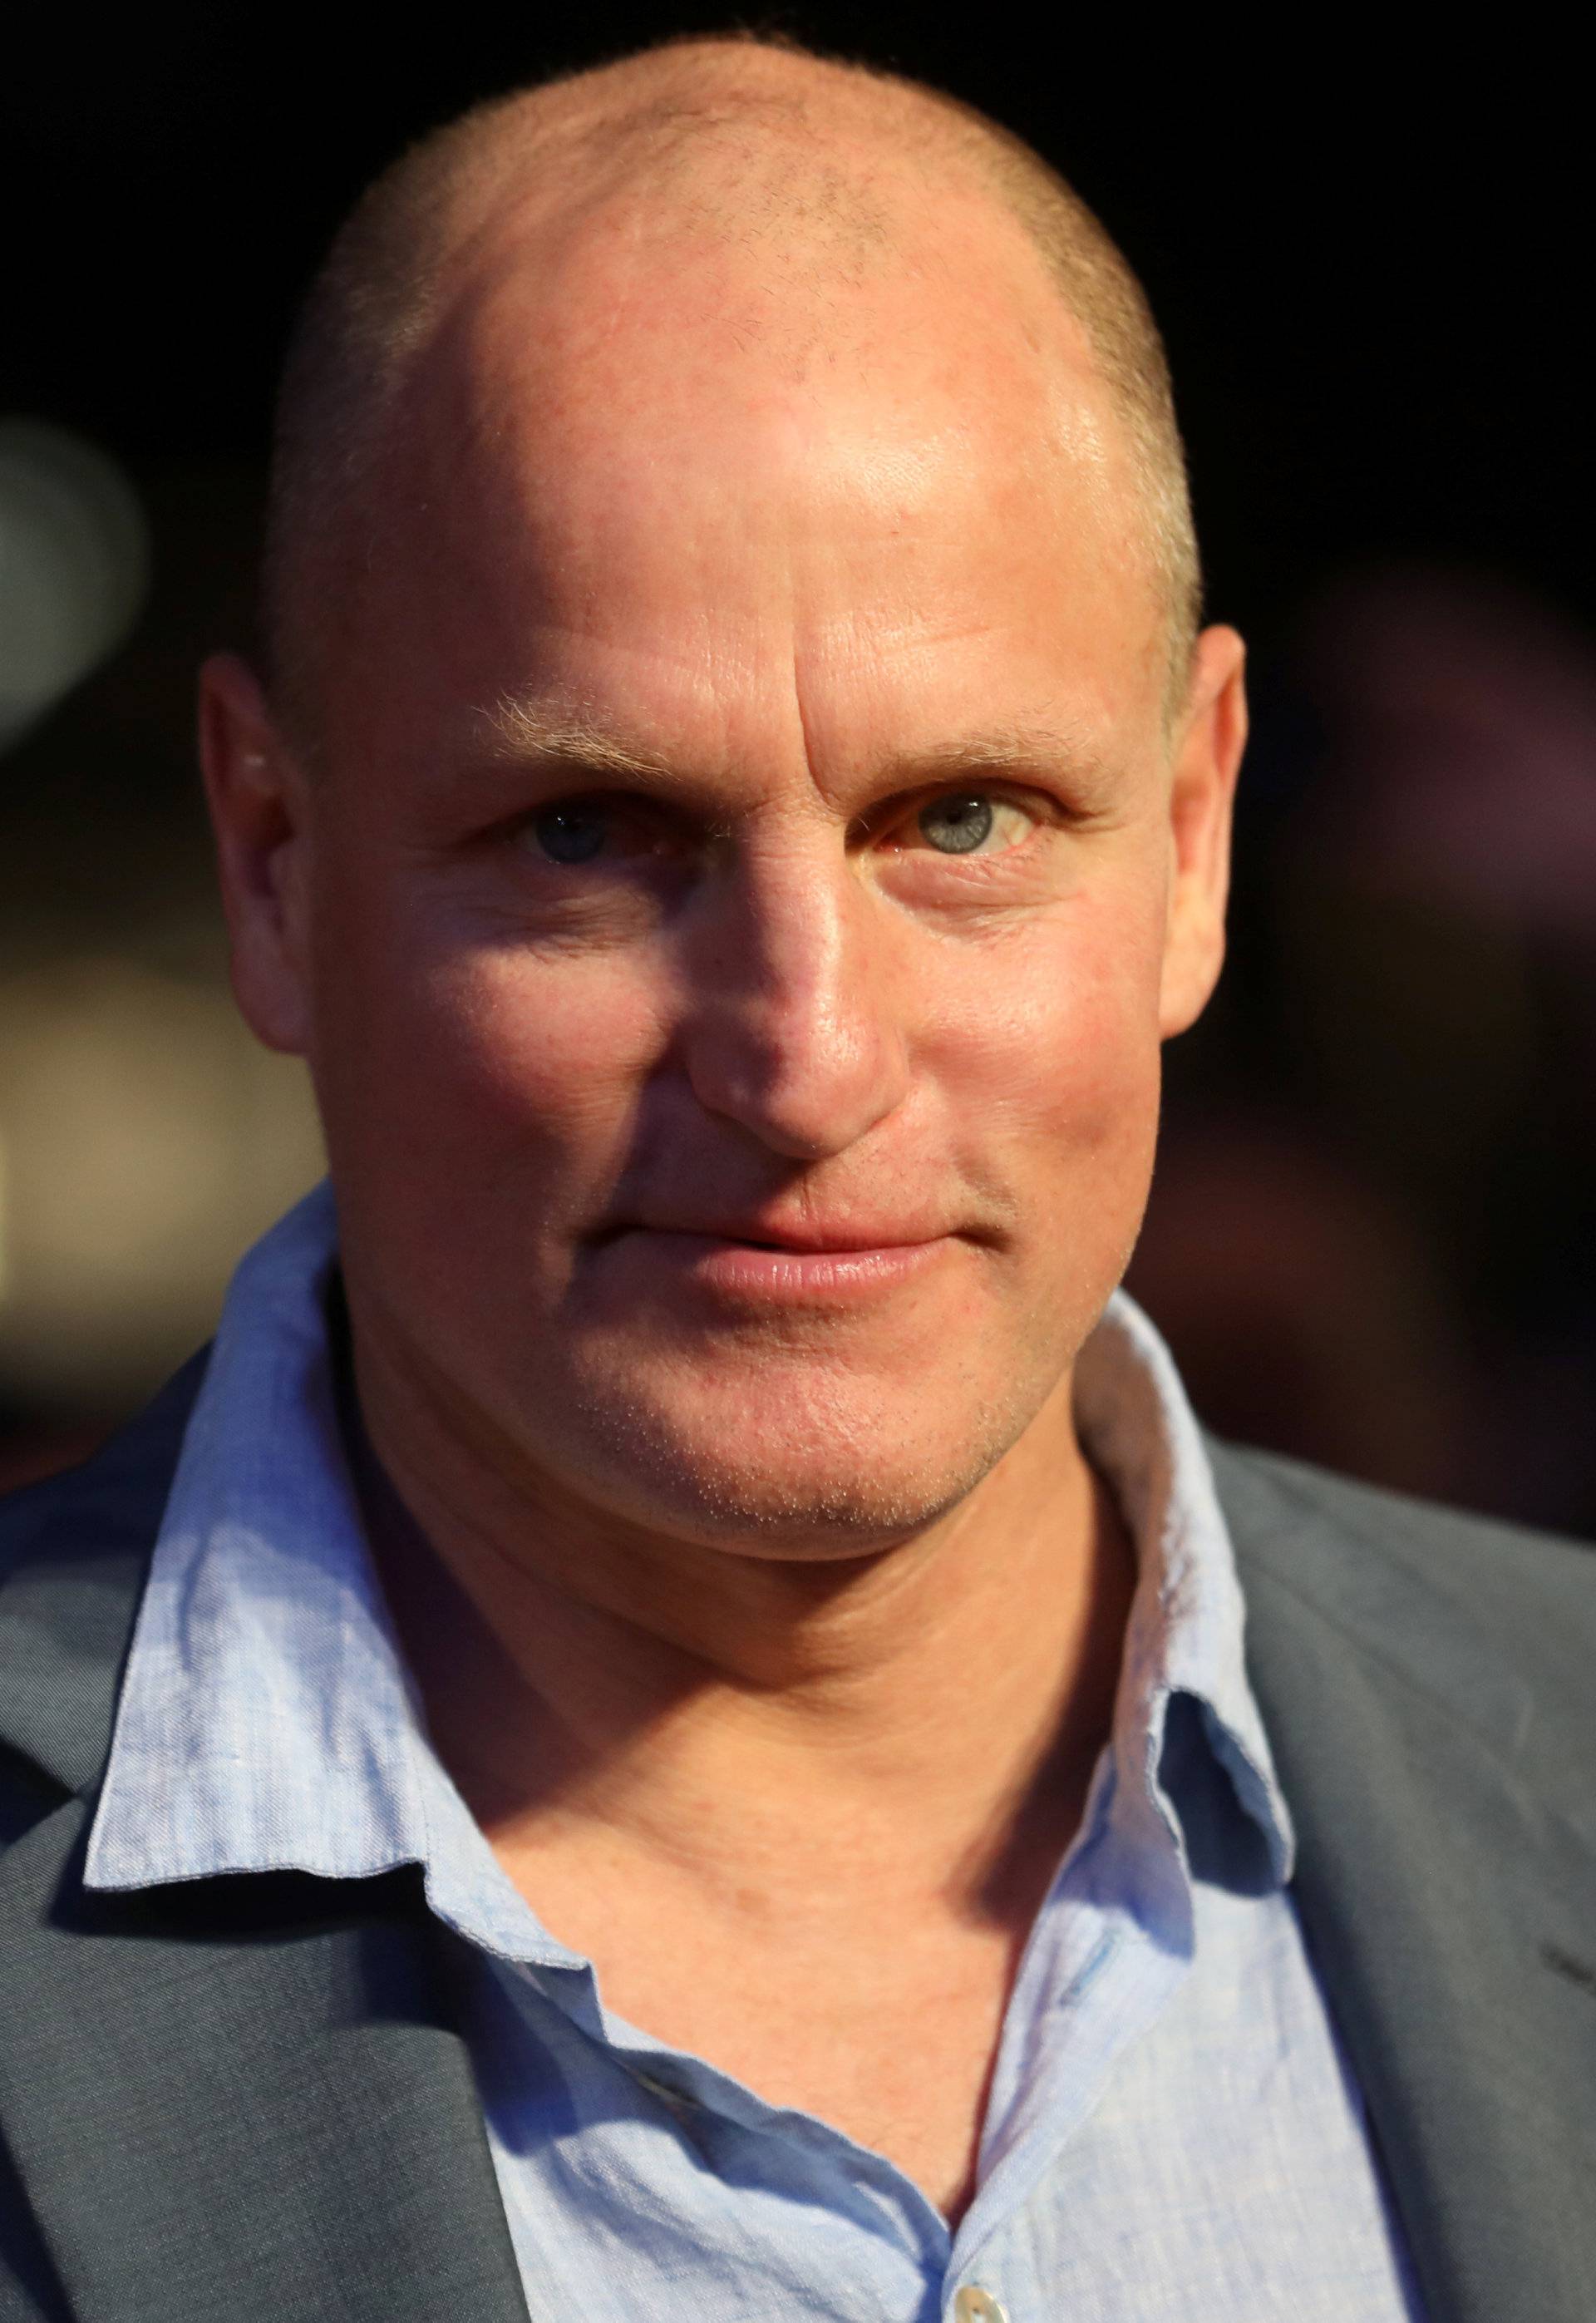 Actor Woody Harrelson arrives for the UK premiere screening of 'Three Billboards Outside Ebbing, Missouri', on the closing night of the London Film Festival, at the Odeon, Leicester Square in central London